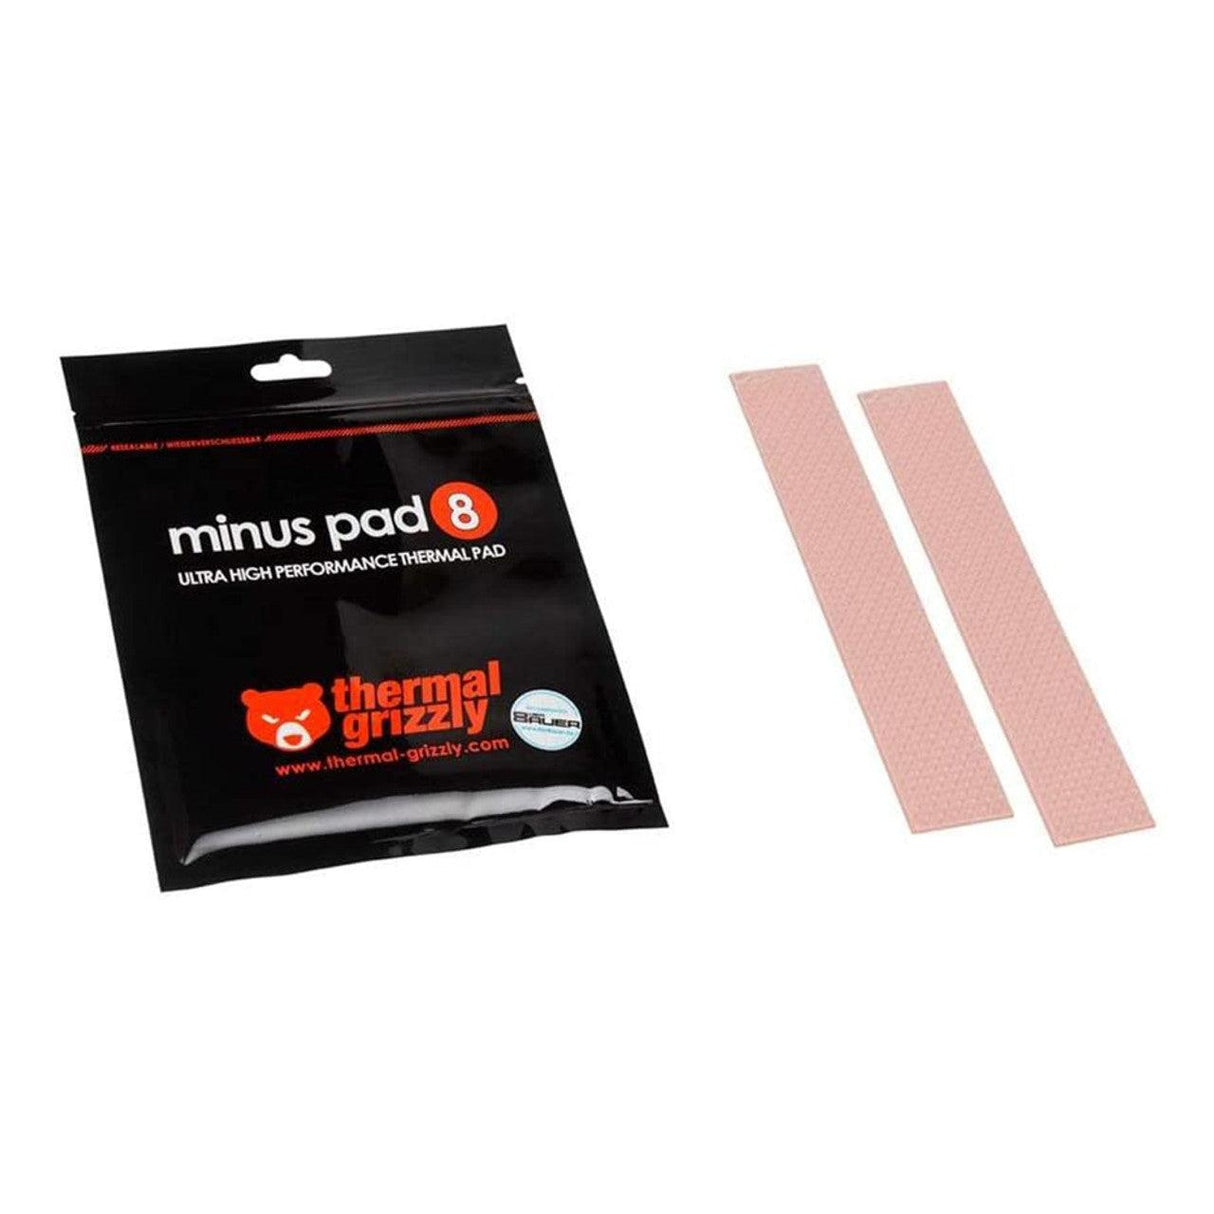 Thermal Grizzly Minus Pad 8 - 20x 120x 1.0 mm - 2 Pack - FrozenCPU